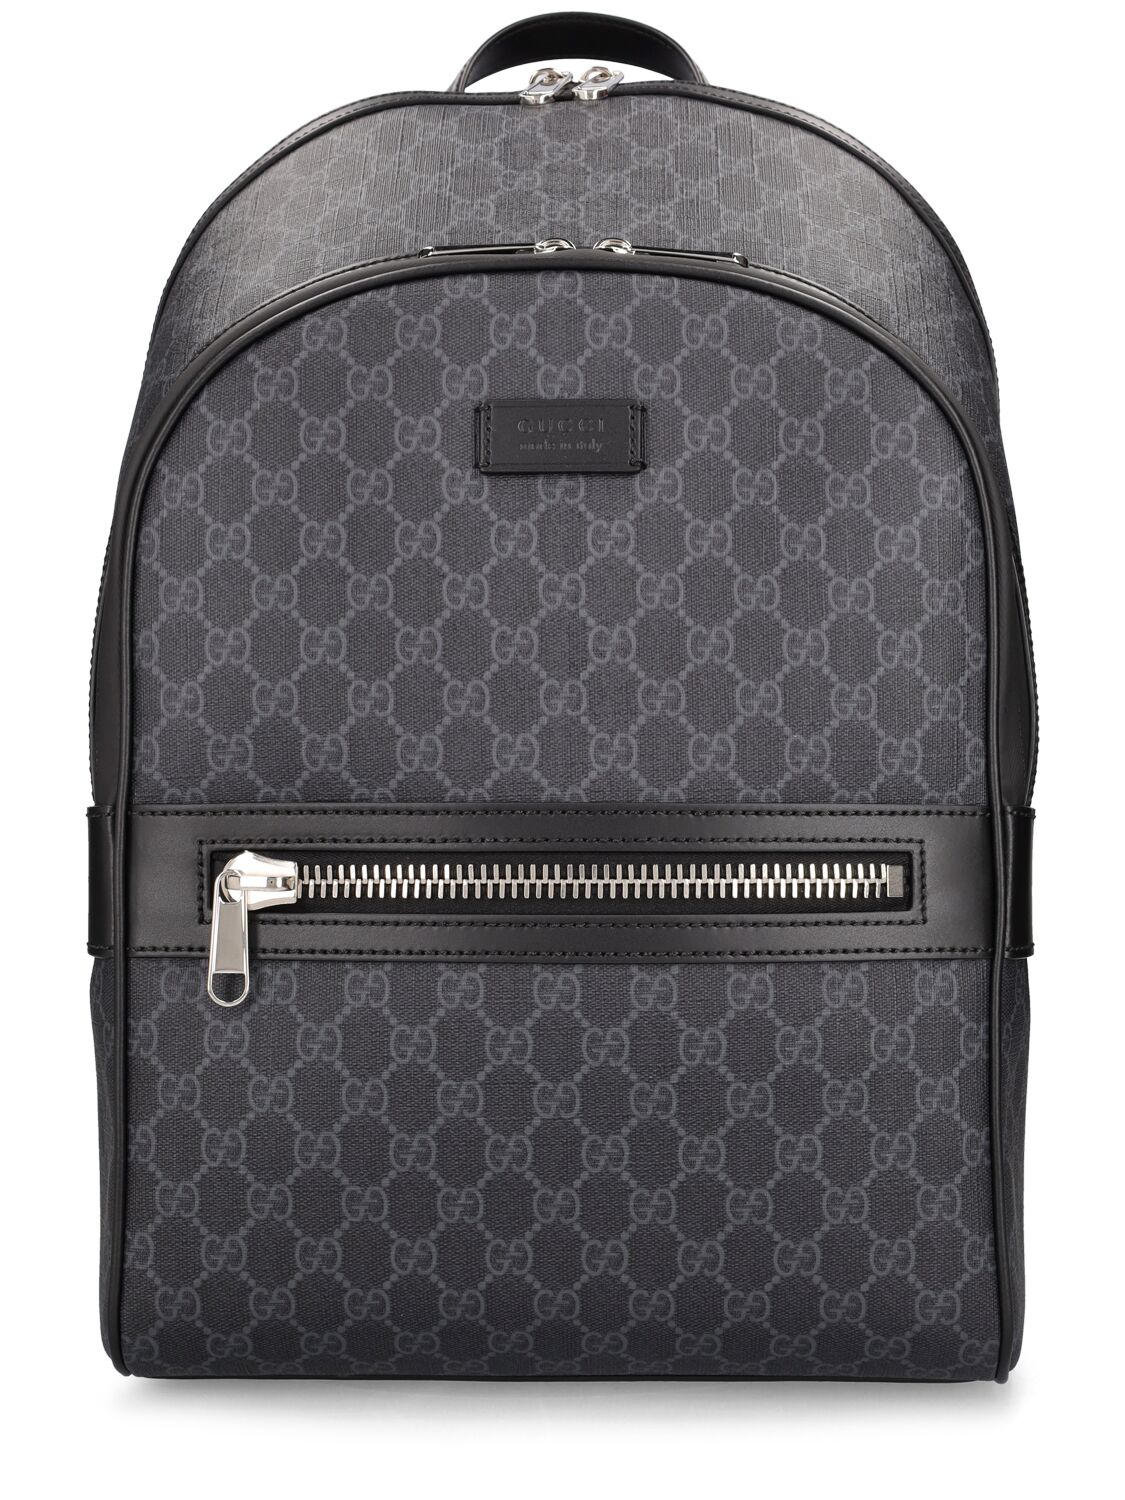 Image of Gg Supreme Canvas Backpack